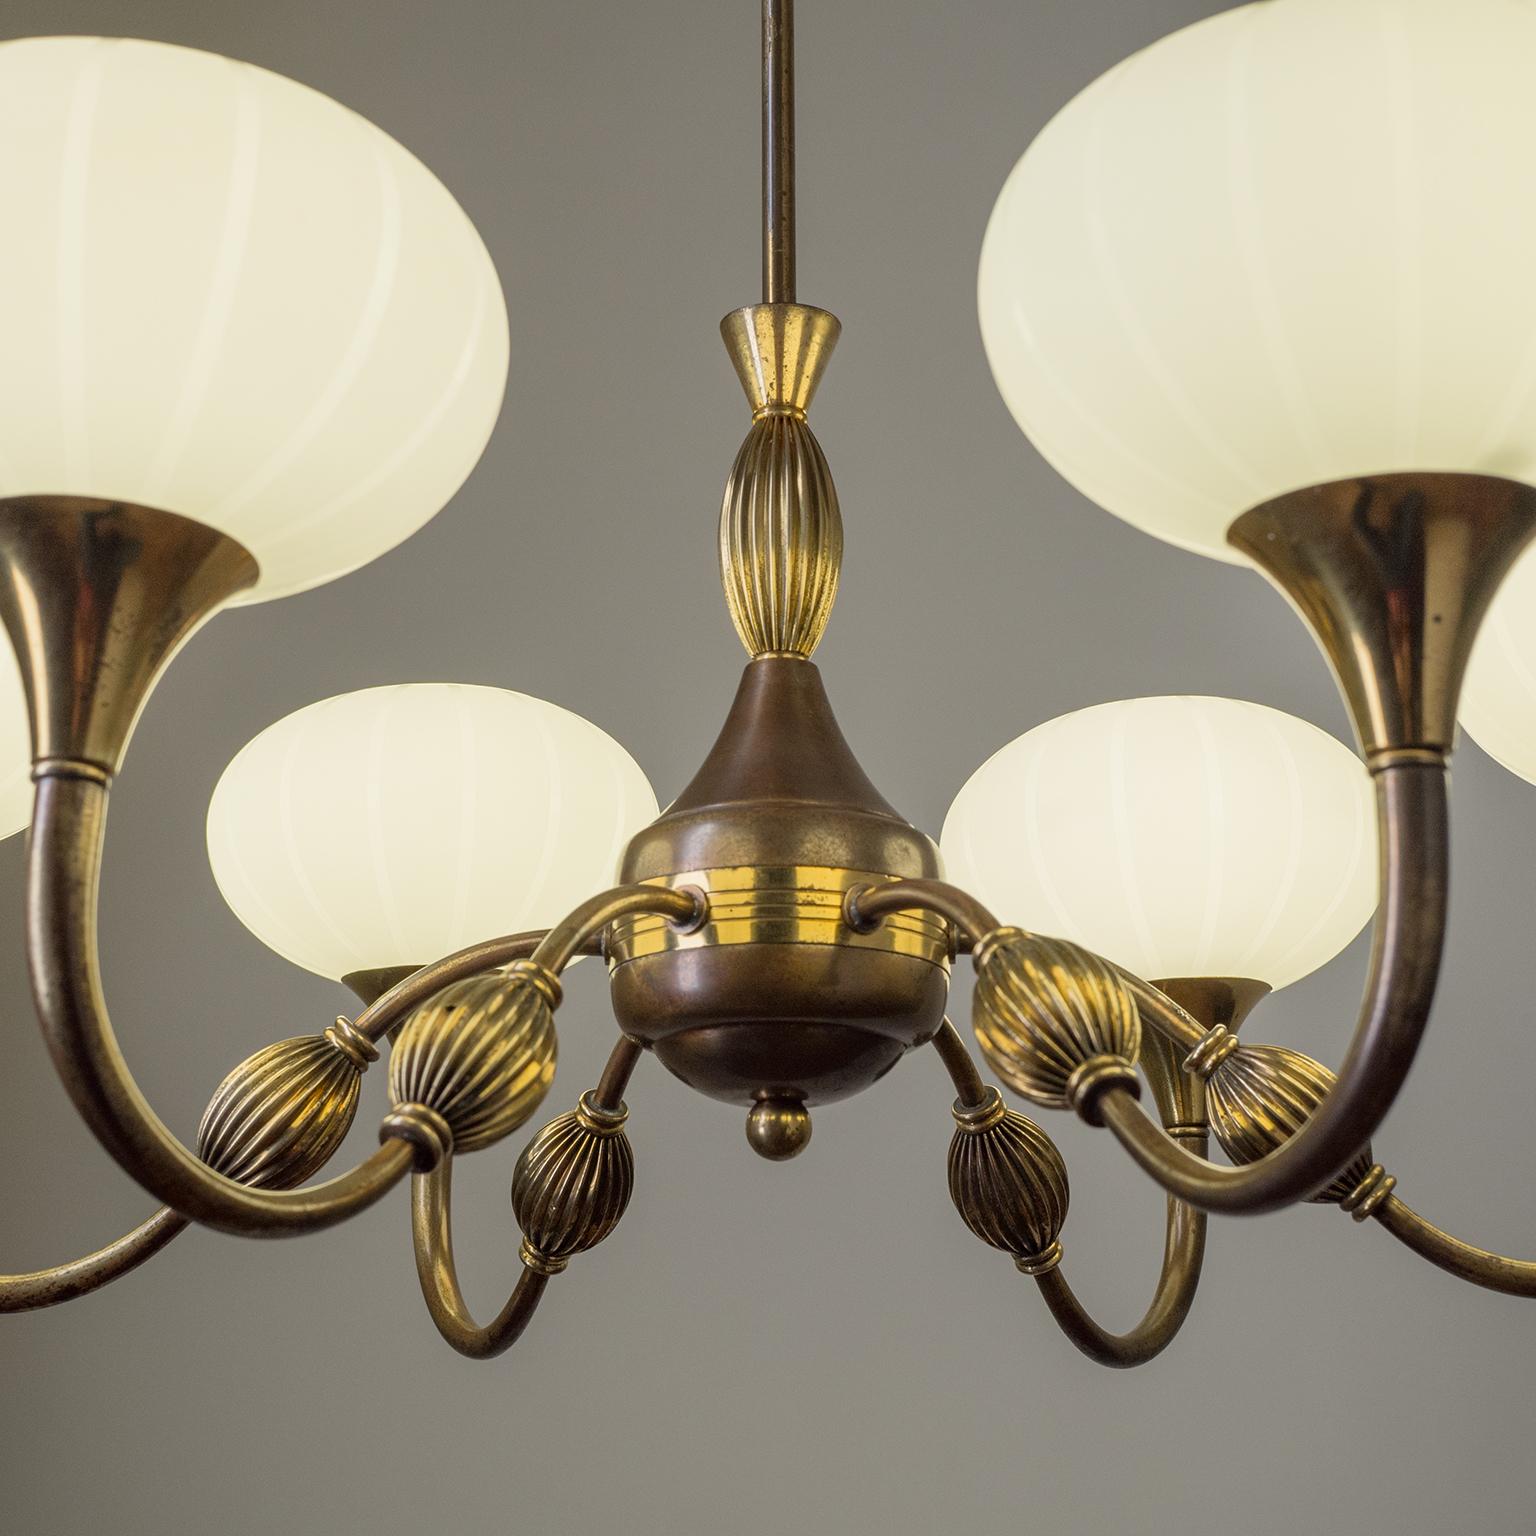 Frosted Italian Chandelier, 1940s, Striped Glass and Brass